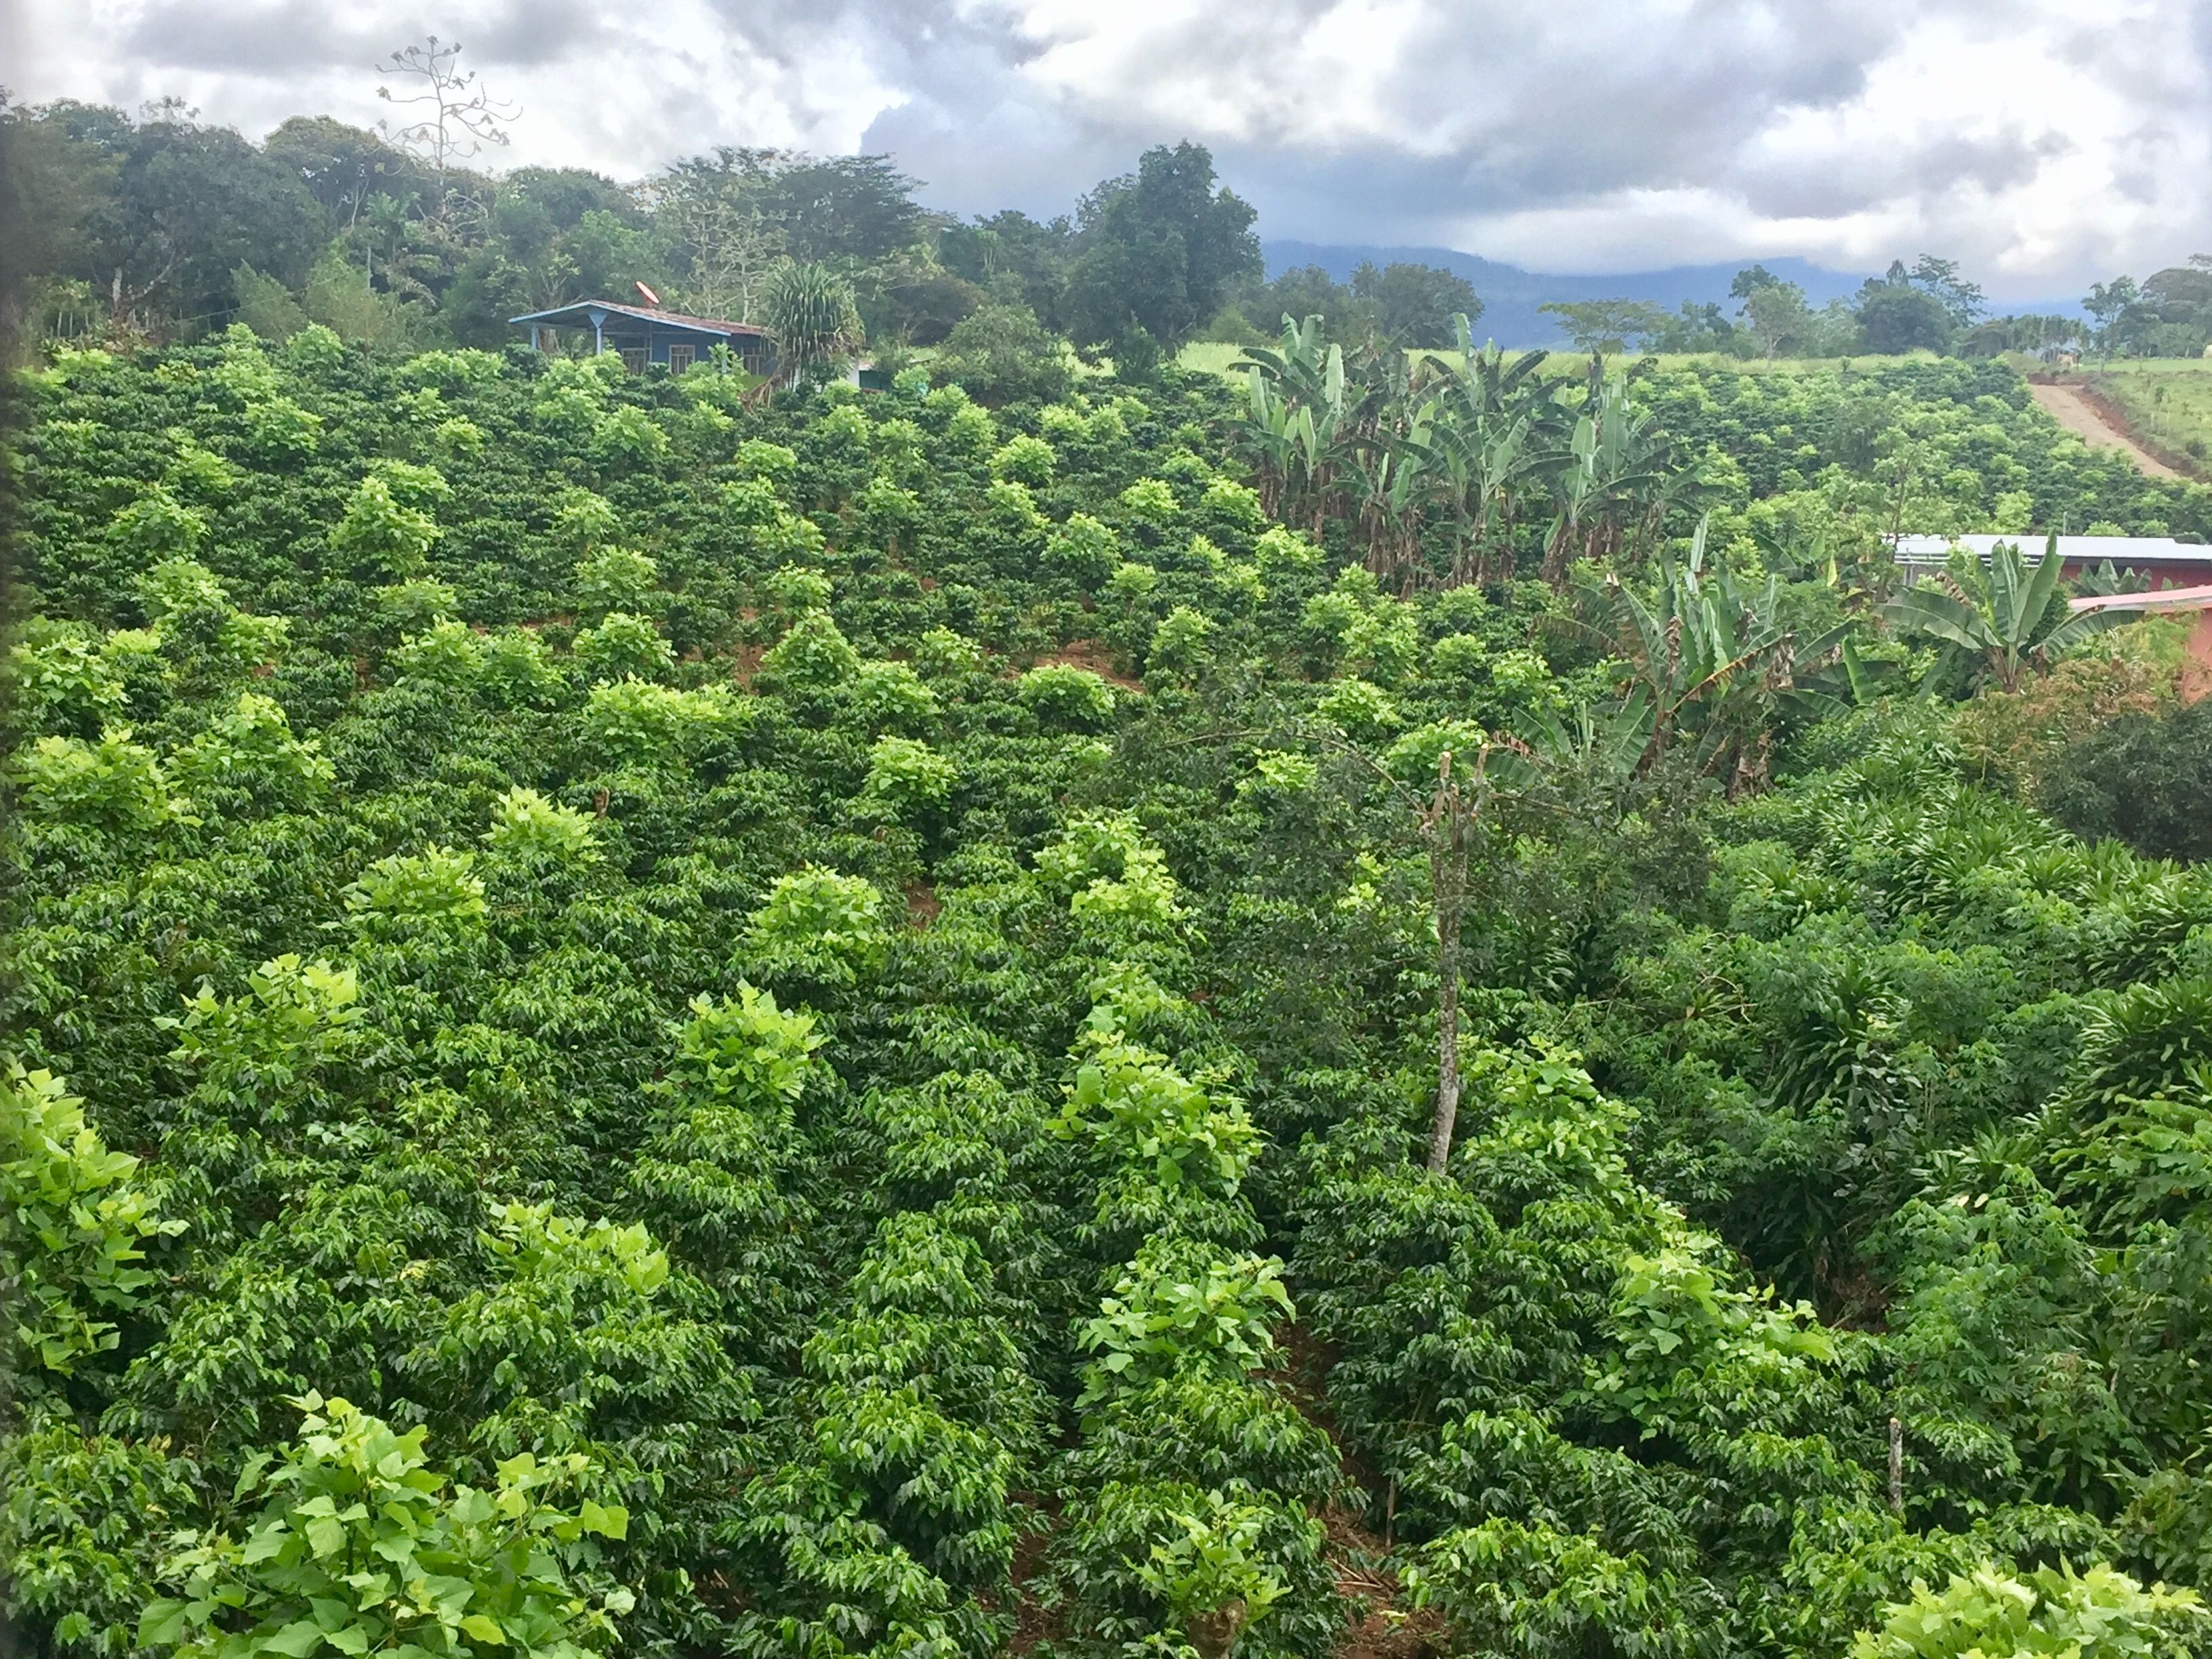 The coffee farm is a key source of speciality coffee. The size of the farm and the quantity of coffee produced influence the farmers' relationship with farmworkers. Image by Samira Tella. Costa Rica, 2018.